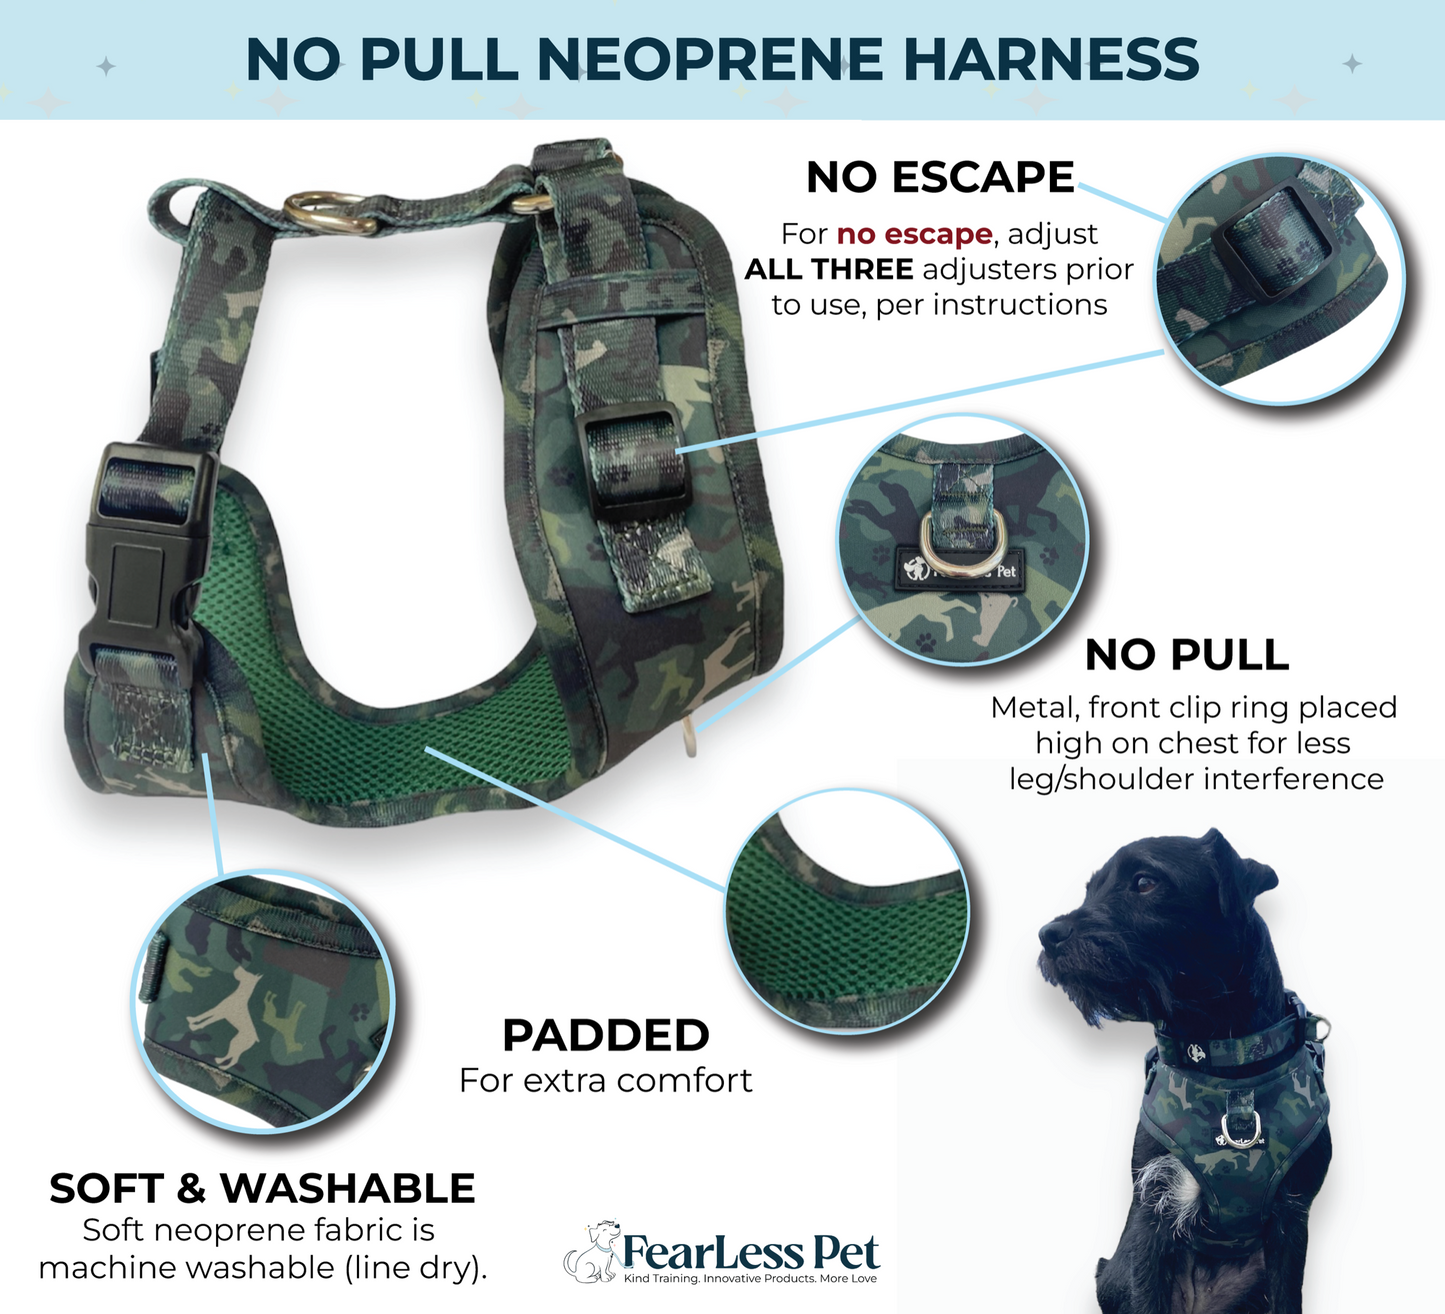 an infographic for a green camo small dog harness that is also no escape and no pull dog harness for x-small dogs